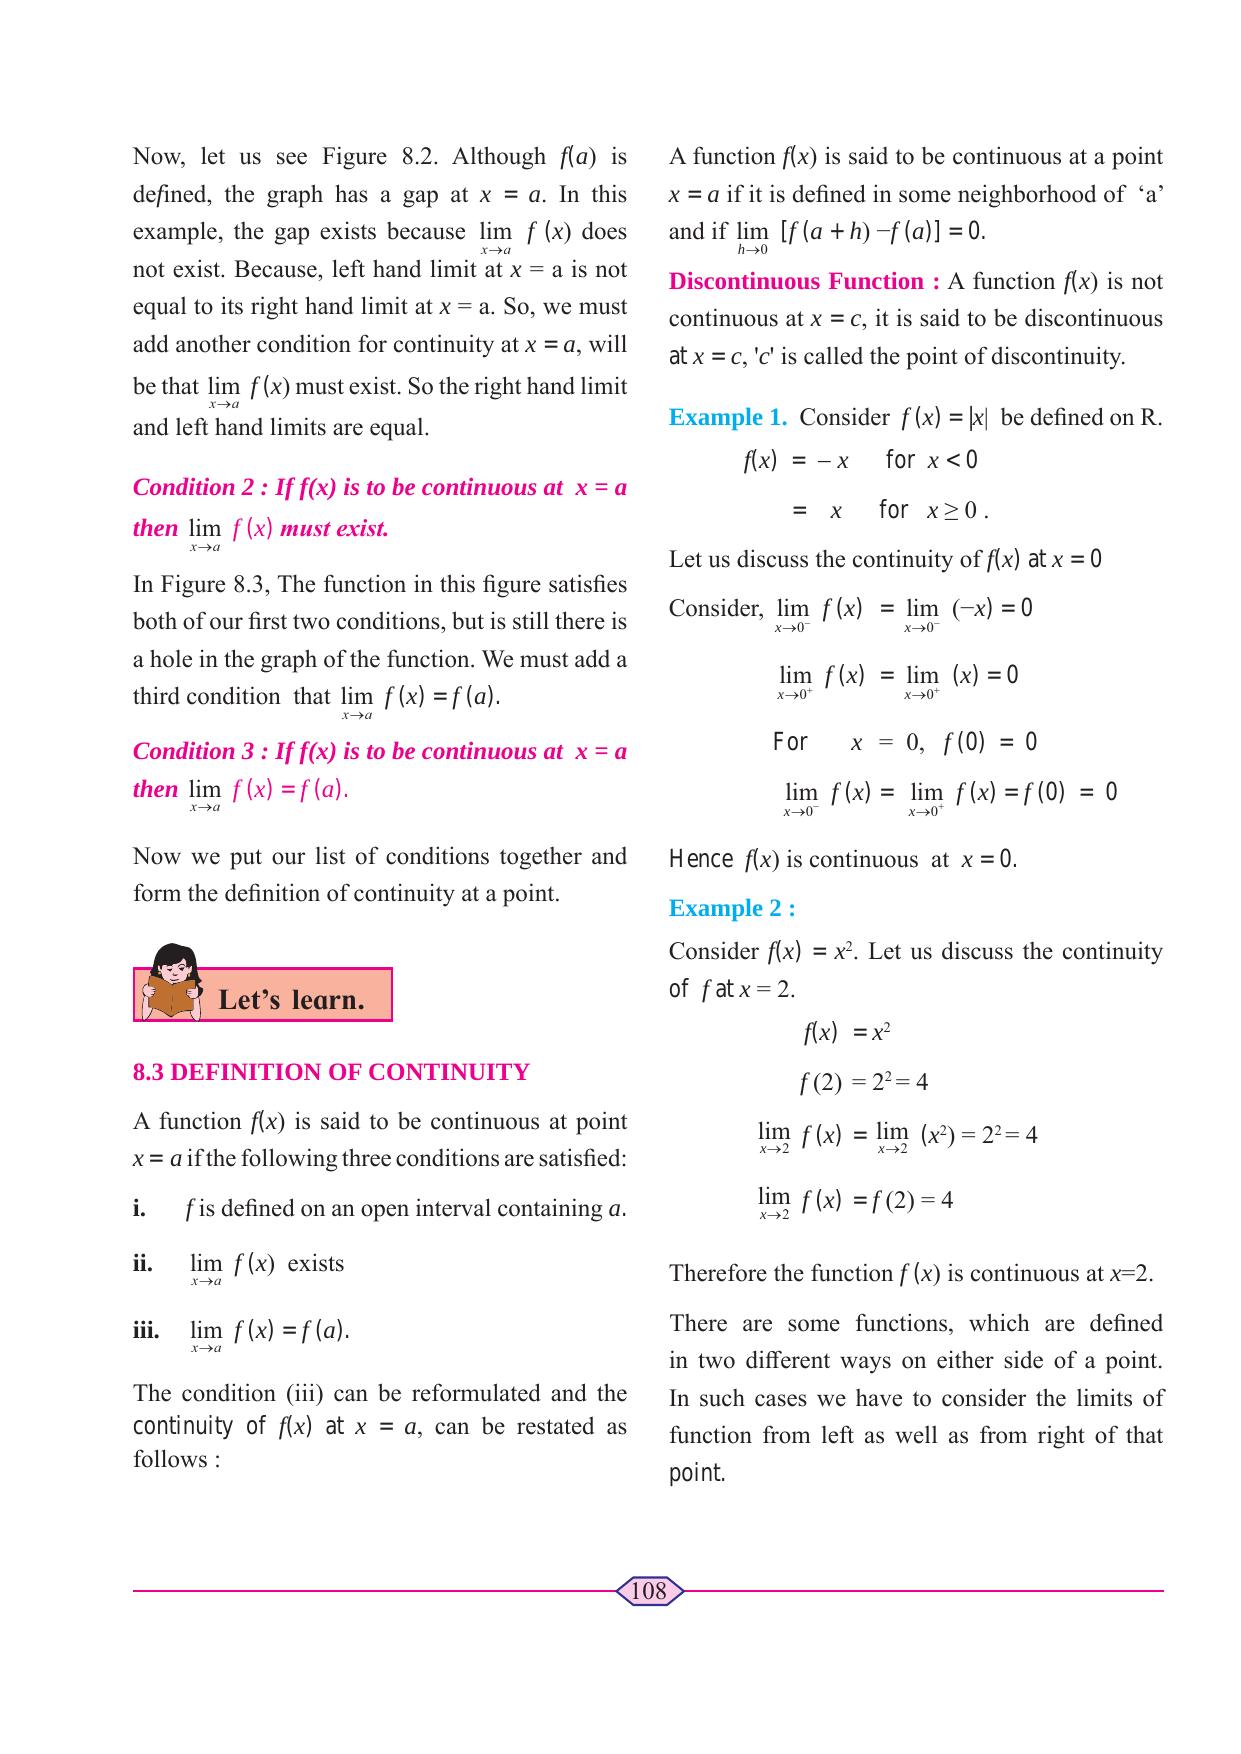 Maharashtra Board Class 11 Maths (Commerce) (Part 1) Textbook - Page 118